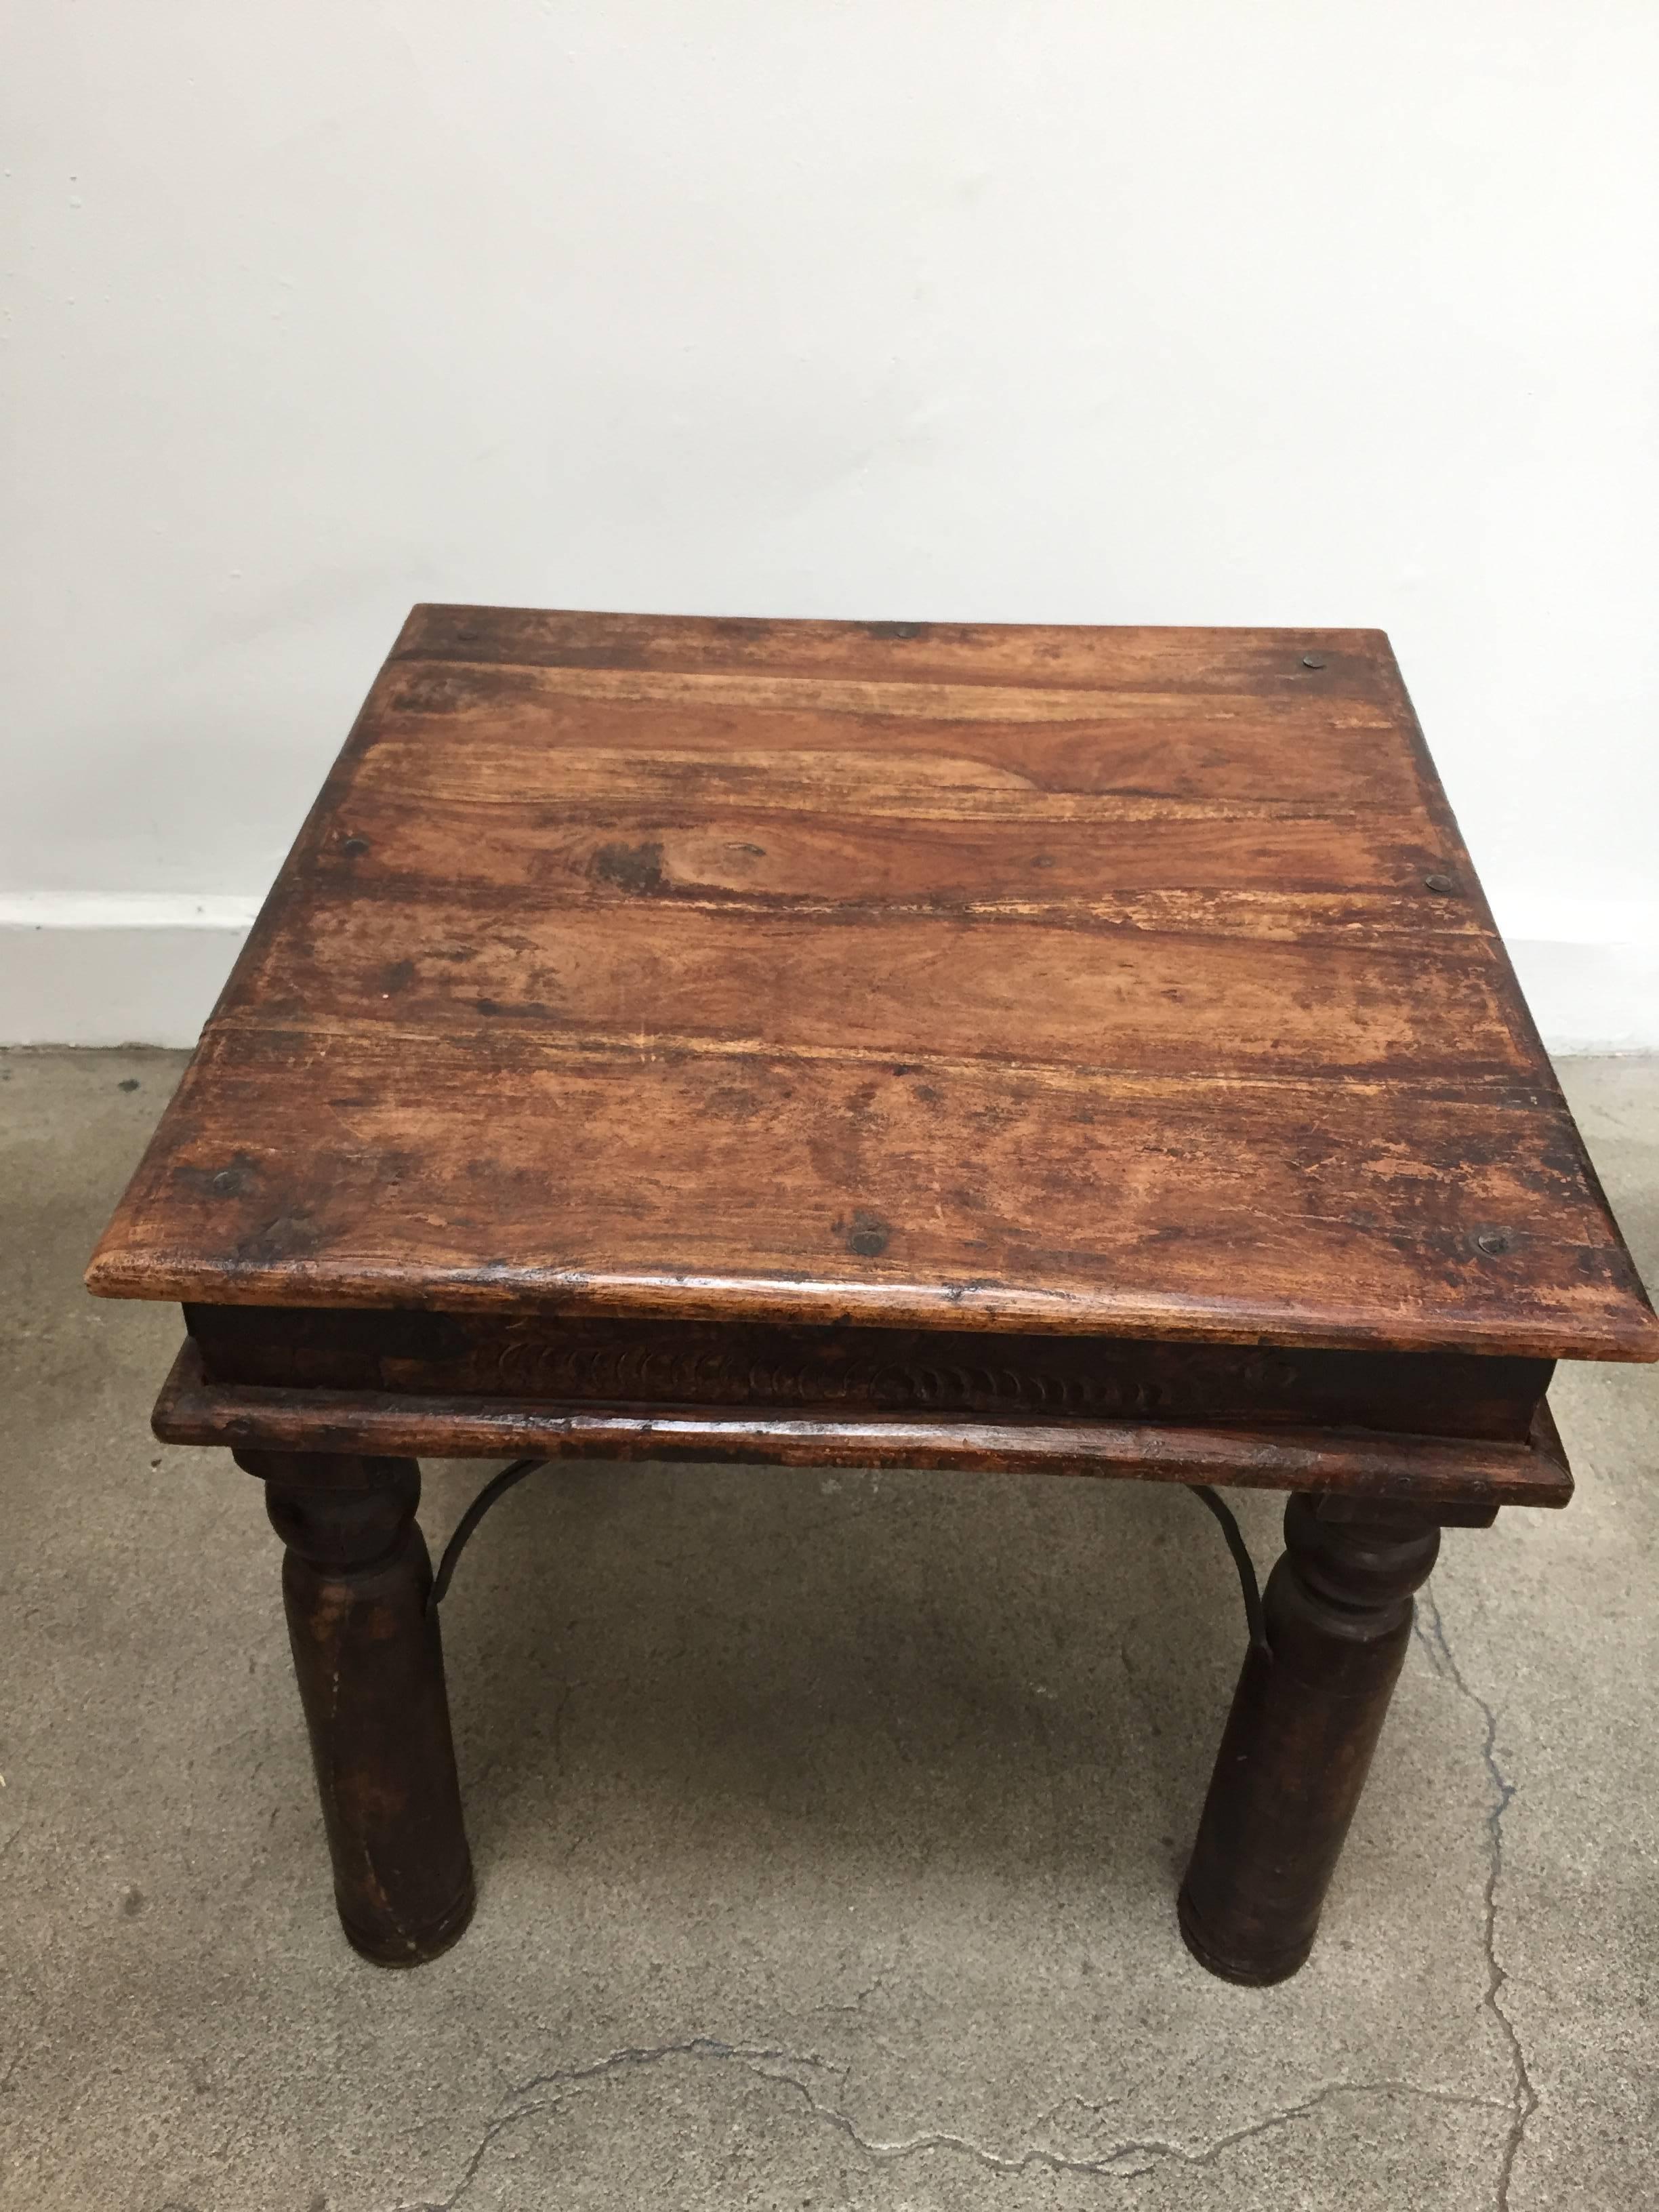 Vintage handcrafted teakwood rectangular side table.
Large rounded nail heads and metal accents support, very nicely carved legs.
Classic old India bajot table with beautiful signs of age and use. 
Sides and corners are reinforced with metal iron